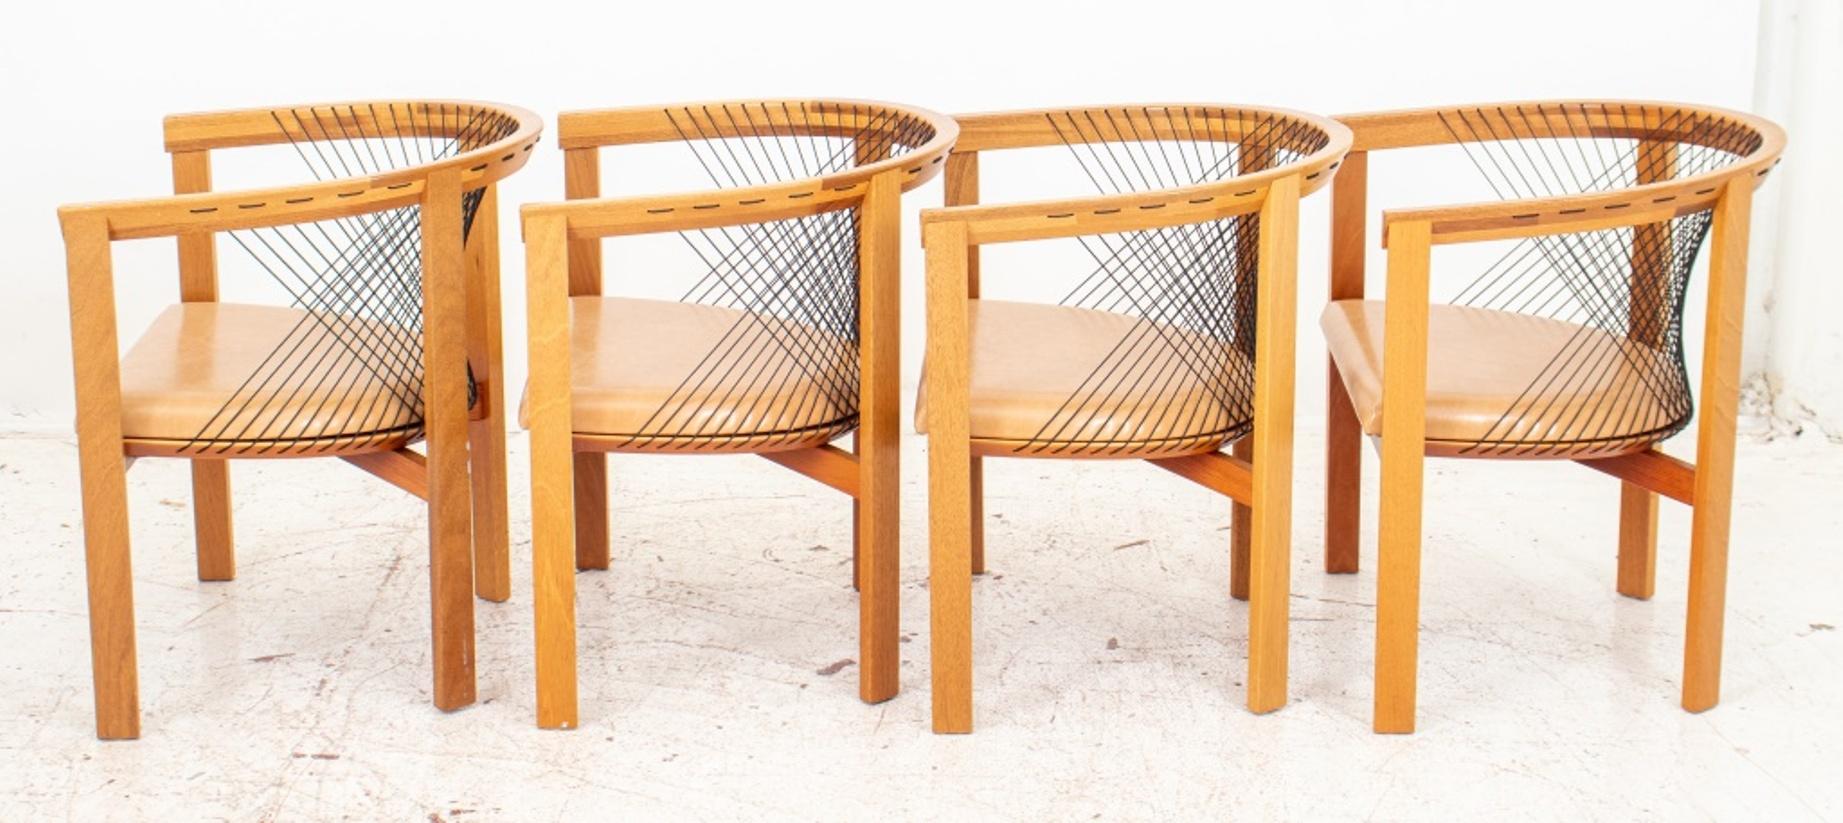 Group of four Danish Modern Niels Jorgen Haugesen (Danish, 1936-2013) for Tranekaer cherry wood string armchairs with tan vegan leather upholstered seat, maker's labels to underside.

Dimensions: 25.5